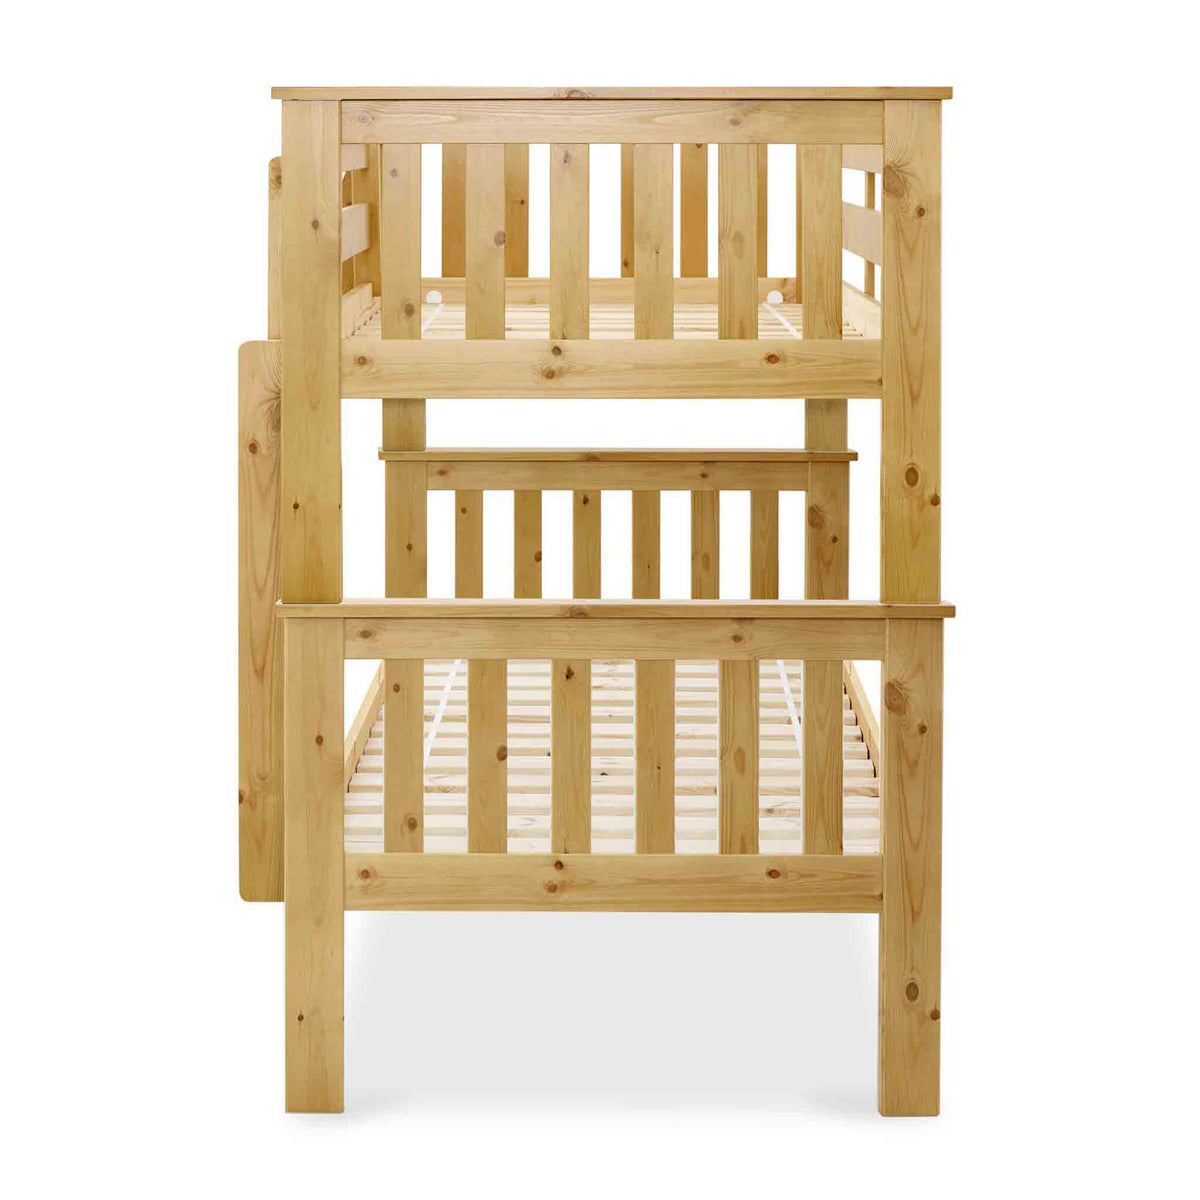 end view of the Carlson Pine Detachable Single Bunk Beds from Roseland Furniture